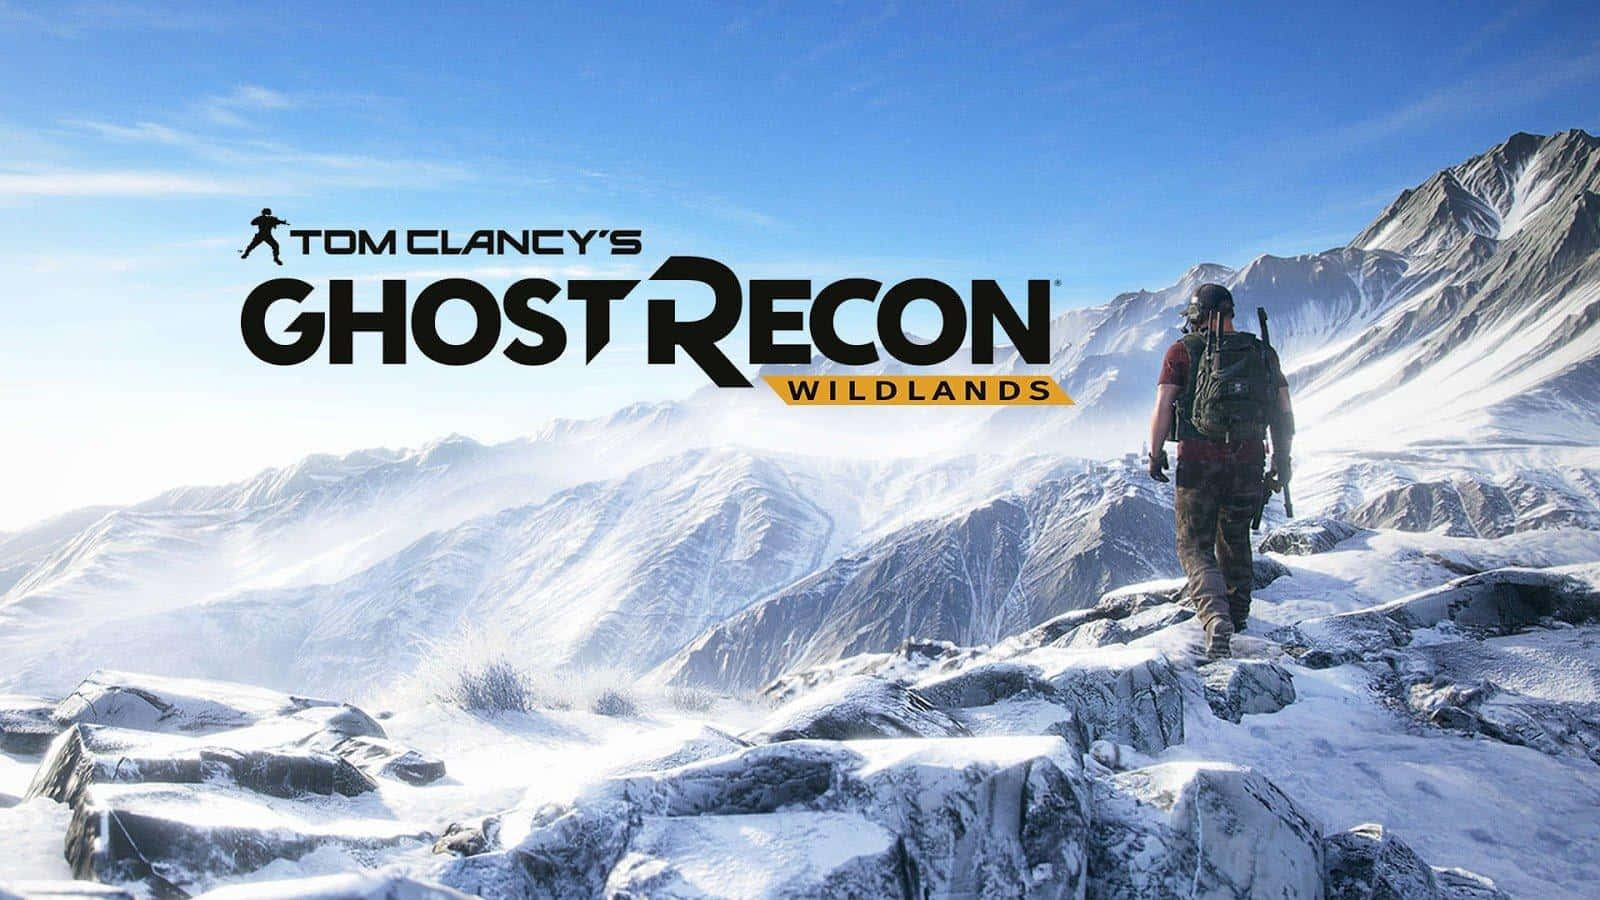 Explore the Wilds of Bolivia in Ghost Recon Wildlands"